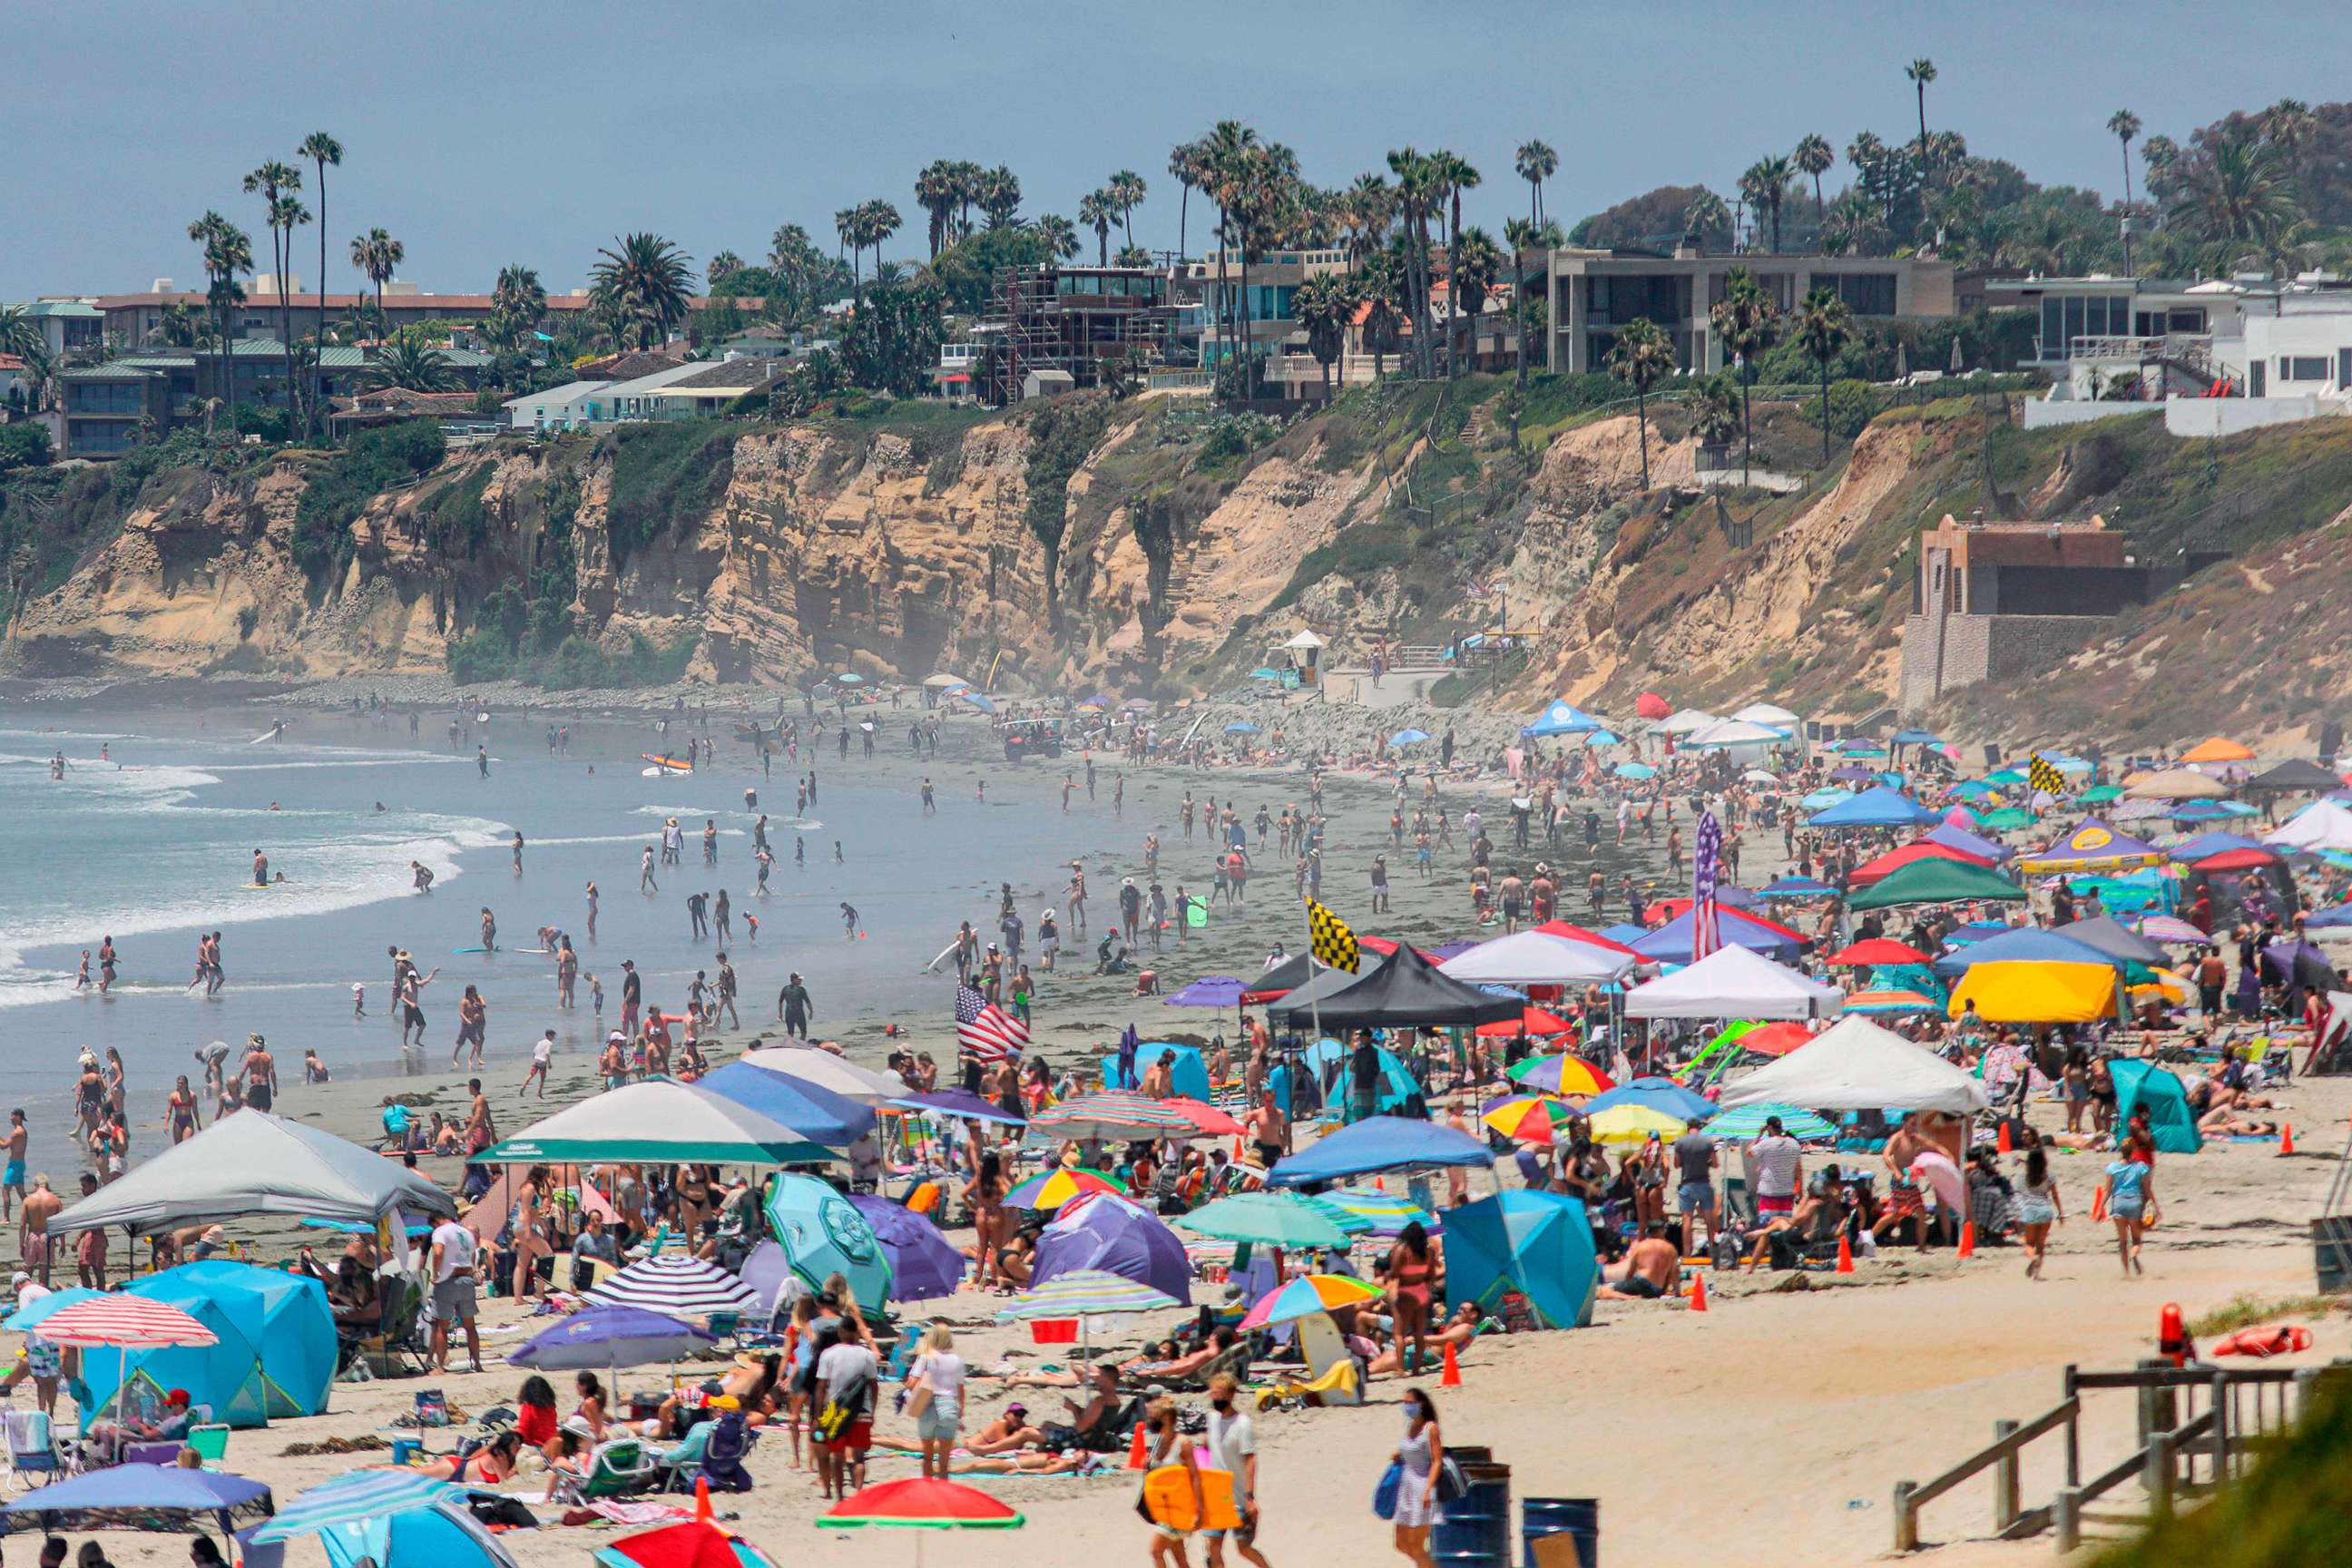 PHOTO: Beachgoers are seen along the shore in the Pacific Beach area of San Diego, Calif., on July 4, 2020, amid the coronavirus pandemic.